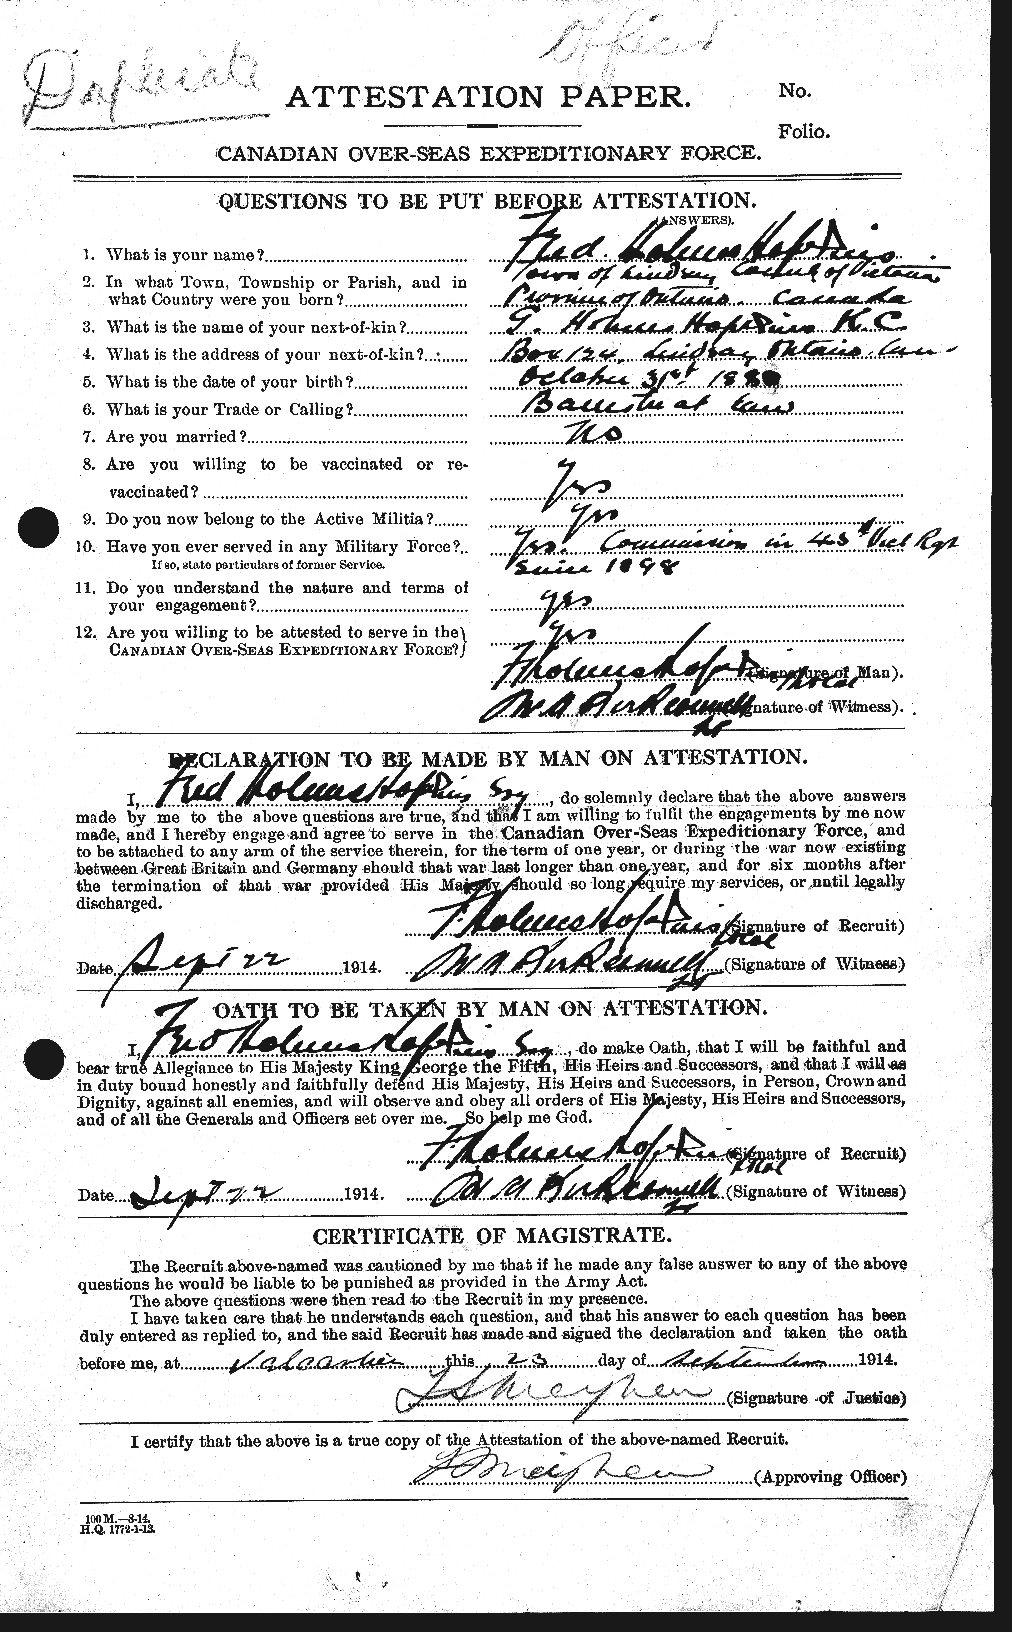 Personnel Records of the First World War - CEF 404812a